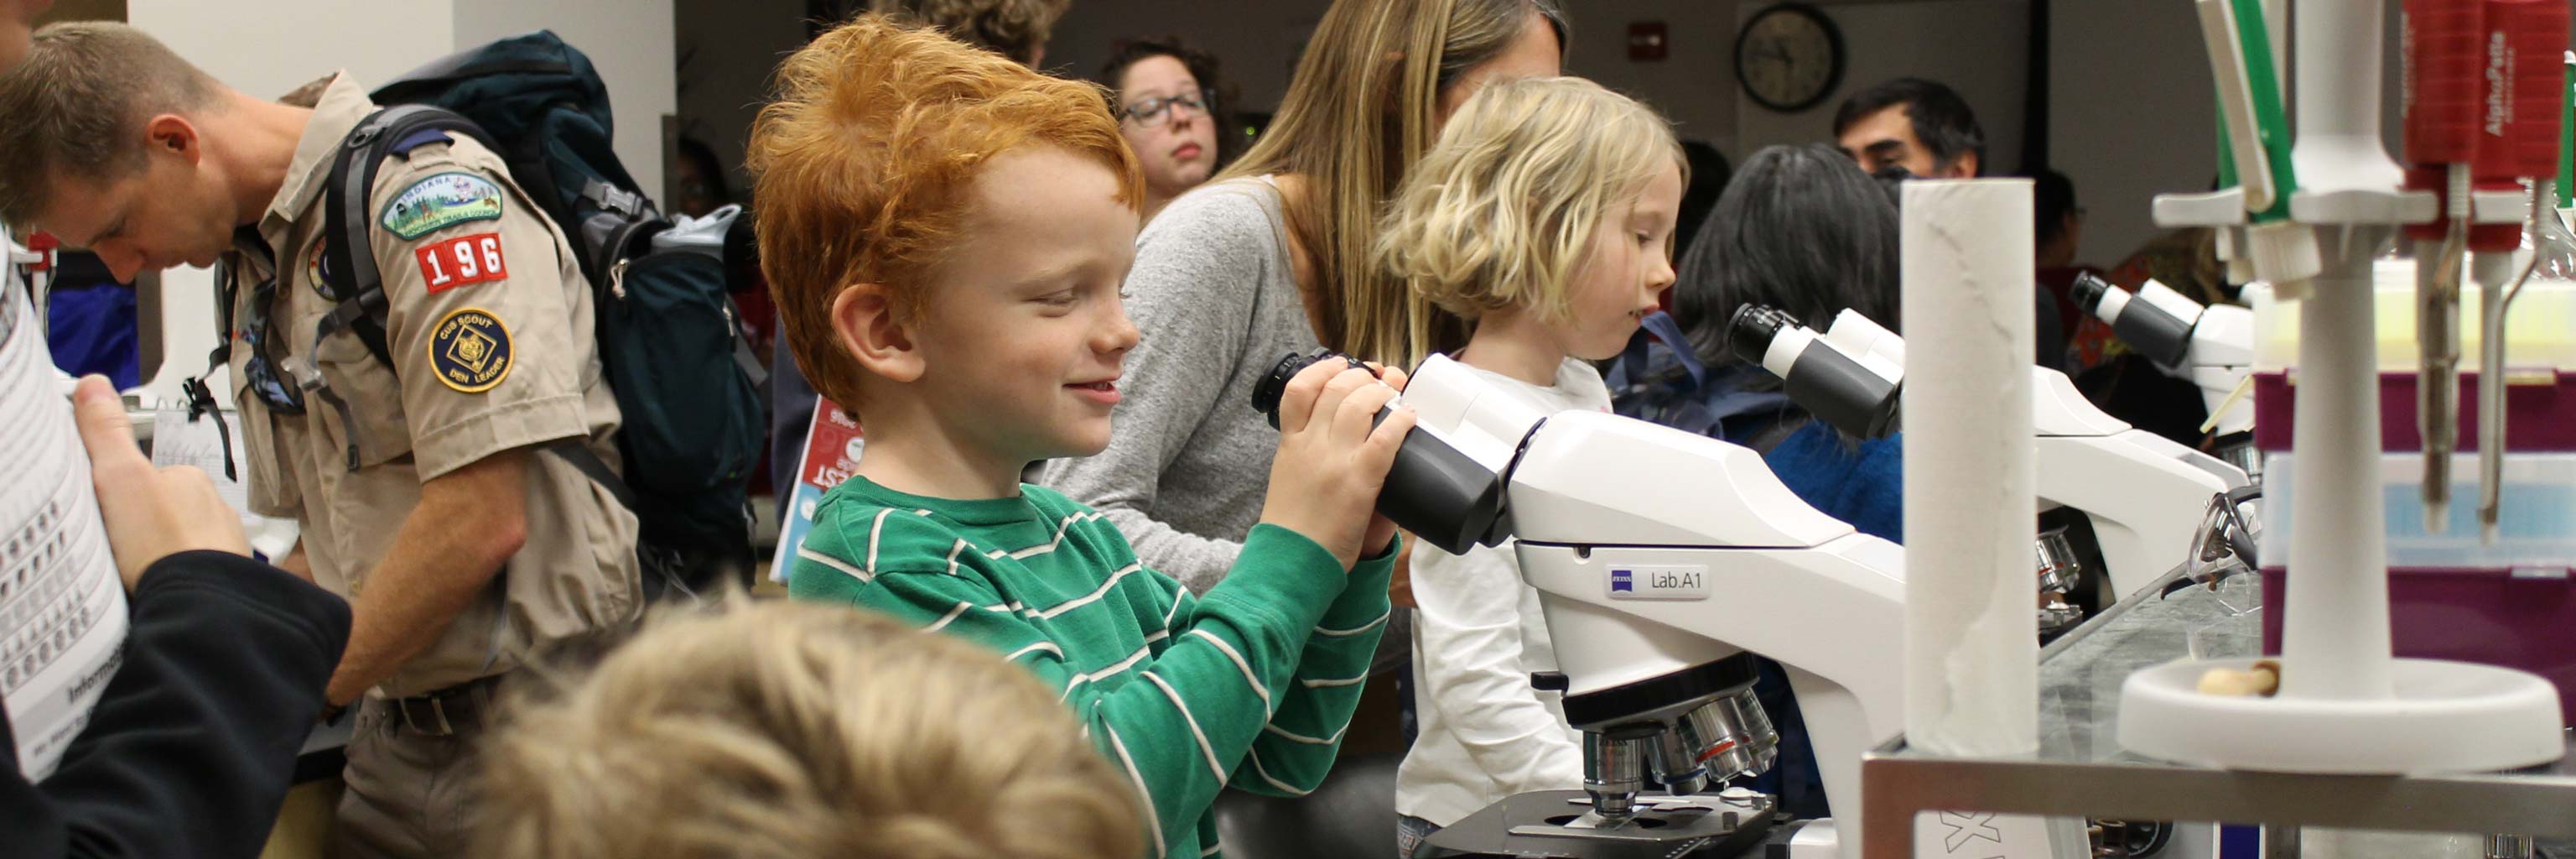 children and students interact during a science event